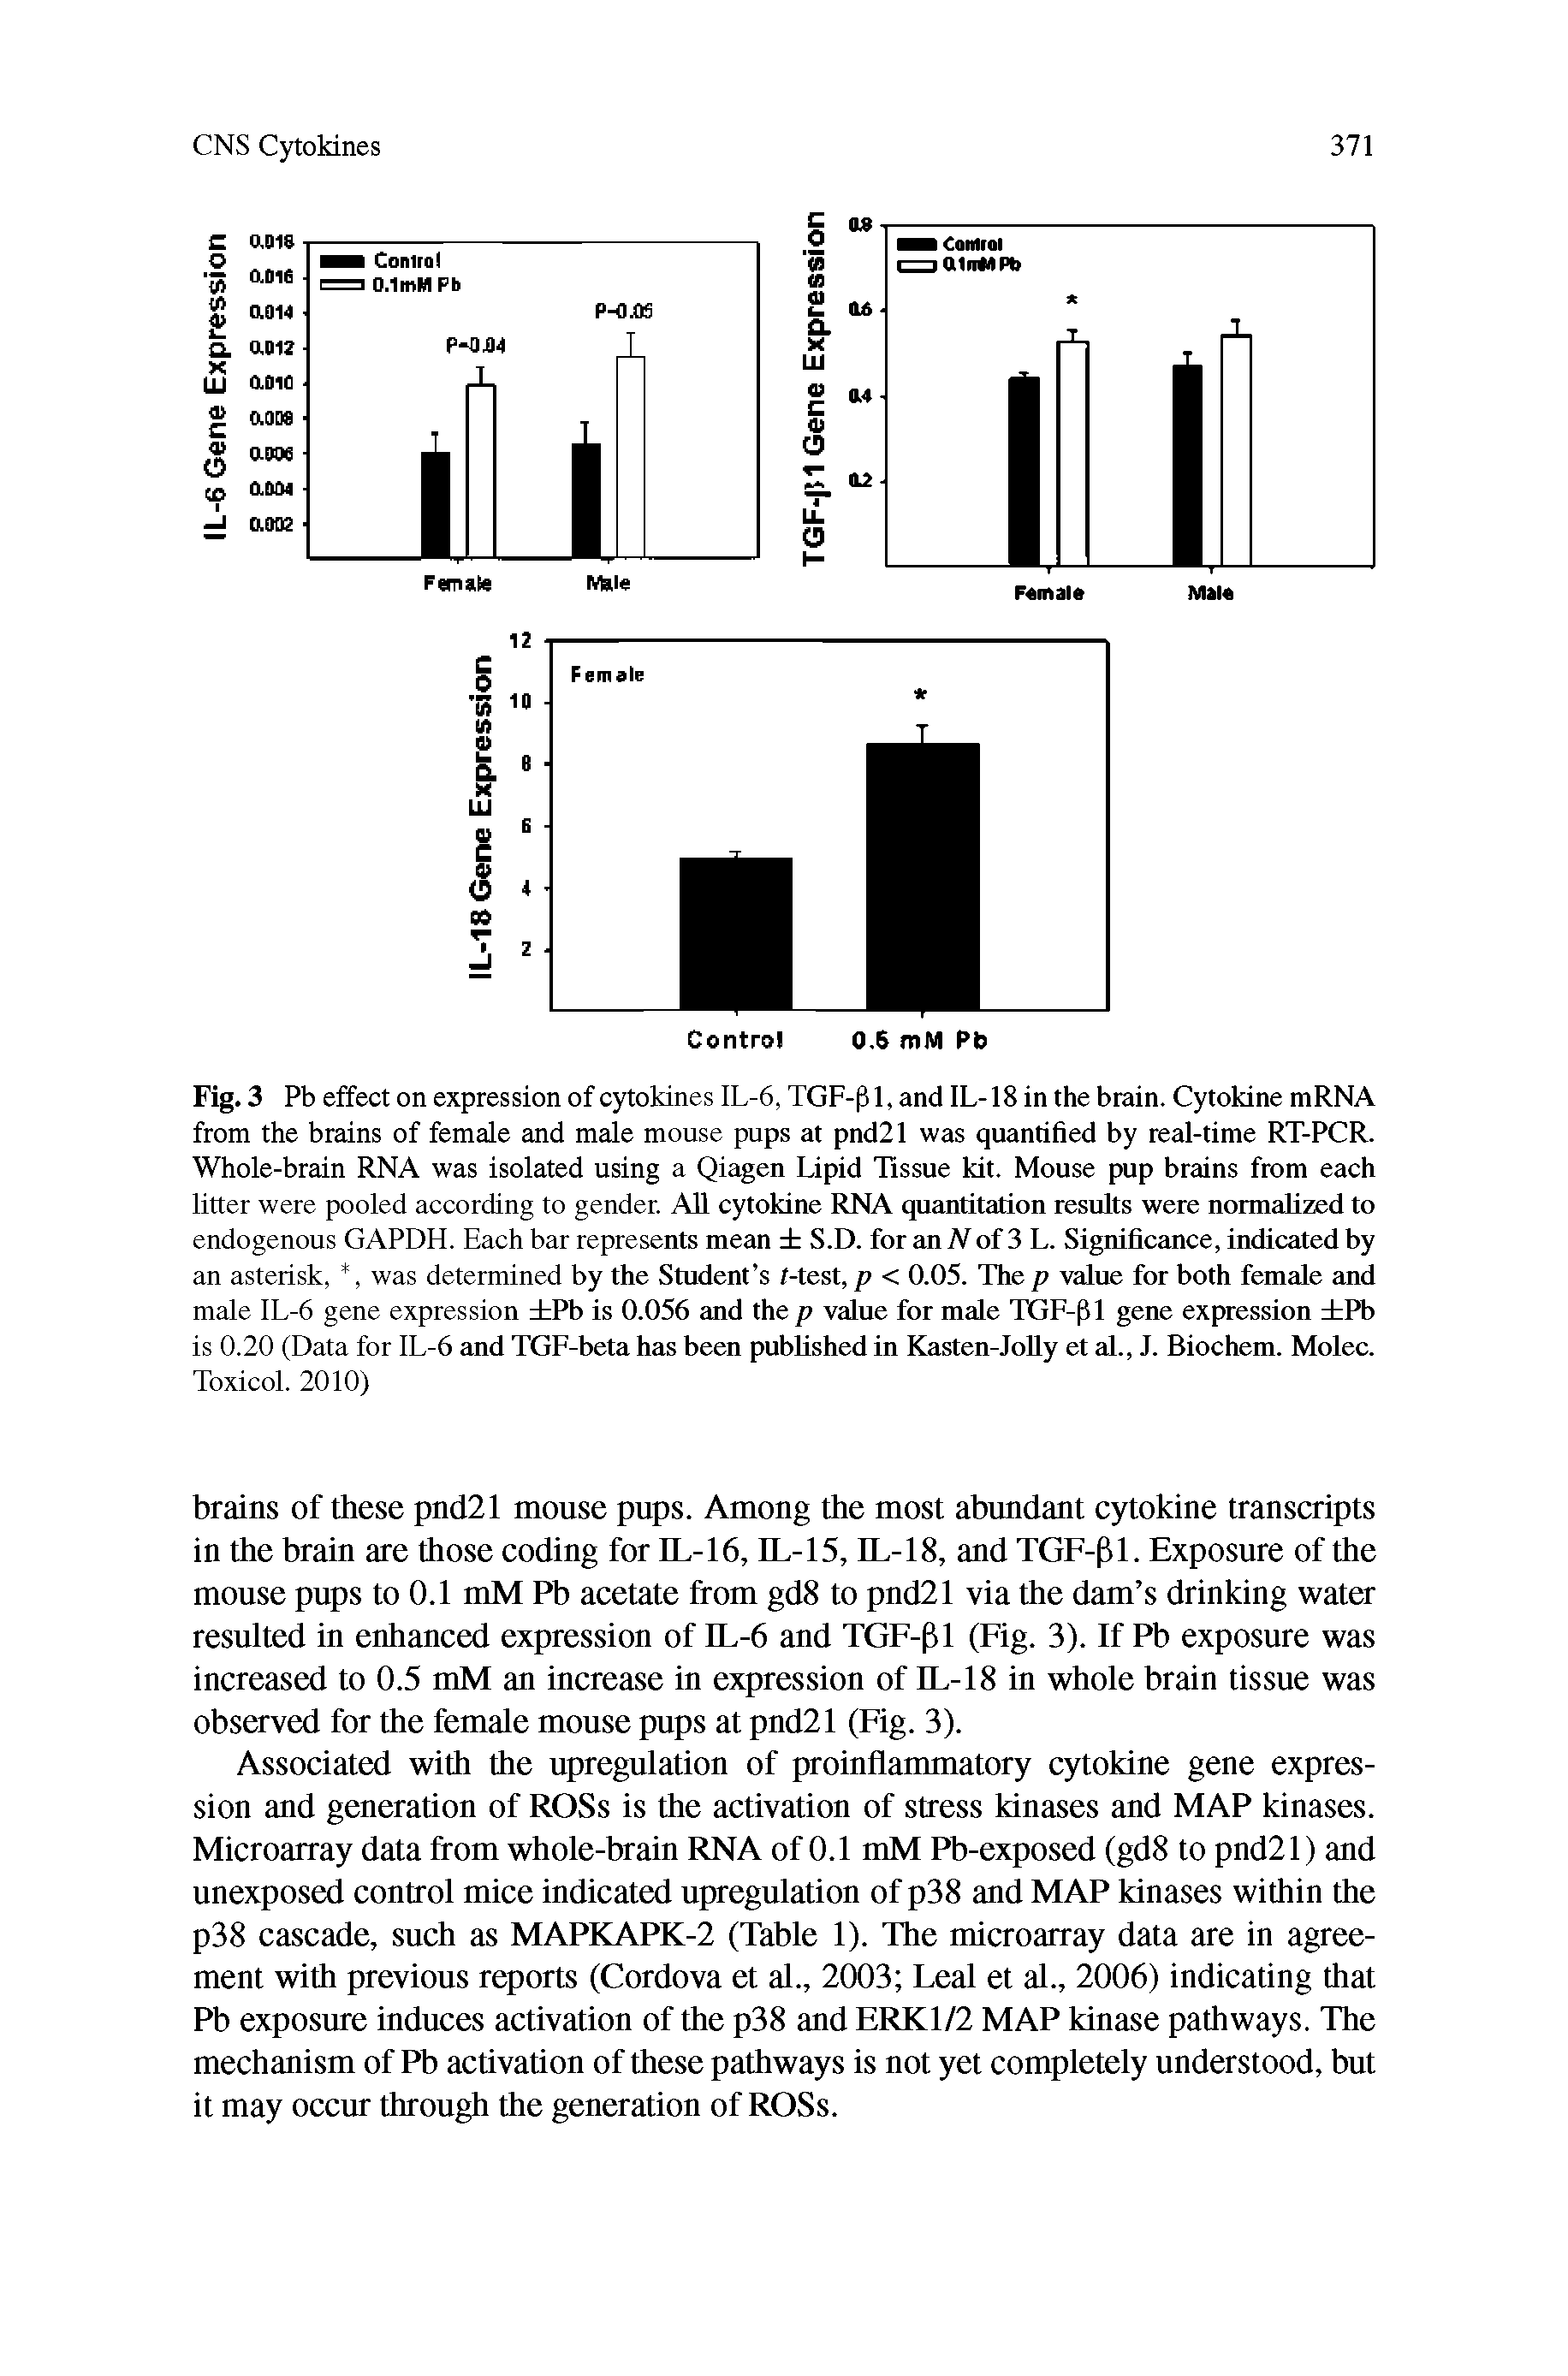 Fig. 3 Pb effect on expression of cytokines IL-6, TGF-P1, and IL-18 in the brain. Cytokine mRNA from the brains of female and male mouse pups at pnd21 was quantified by real-time RT-PCR. Whole-brain RNA was isolated using a Qiagen lipid Tissue kit. Mouse pup brains from each litter were pooled according to gender. AU cytokine RNA quantitation results were normalized to endogenous GAPDH. Each bar represents mean S.D. for an iV of 3 L. Significance, indicated by an asterisk,, was determined by the Student s /-test, p < 0.05. The p value for both female and male lL-6 gene expression Pb is 0.056 and the p value for male TGF-P1 gene expression Pb is 0.20 (Data for lL-6 and TGF-beta has been published in Kasten-JoUy et al., J. Biochem. Molec. Toxicol. 2010)...